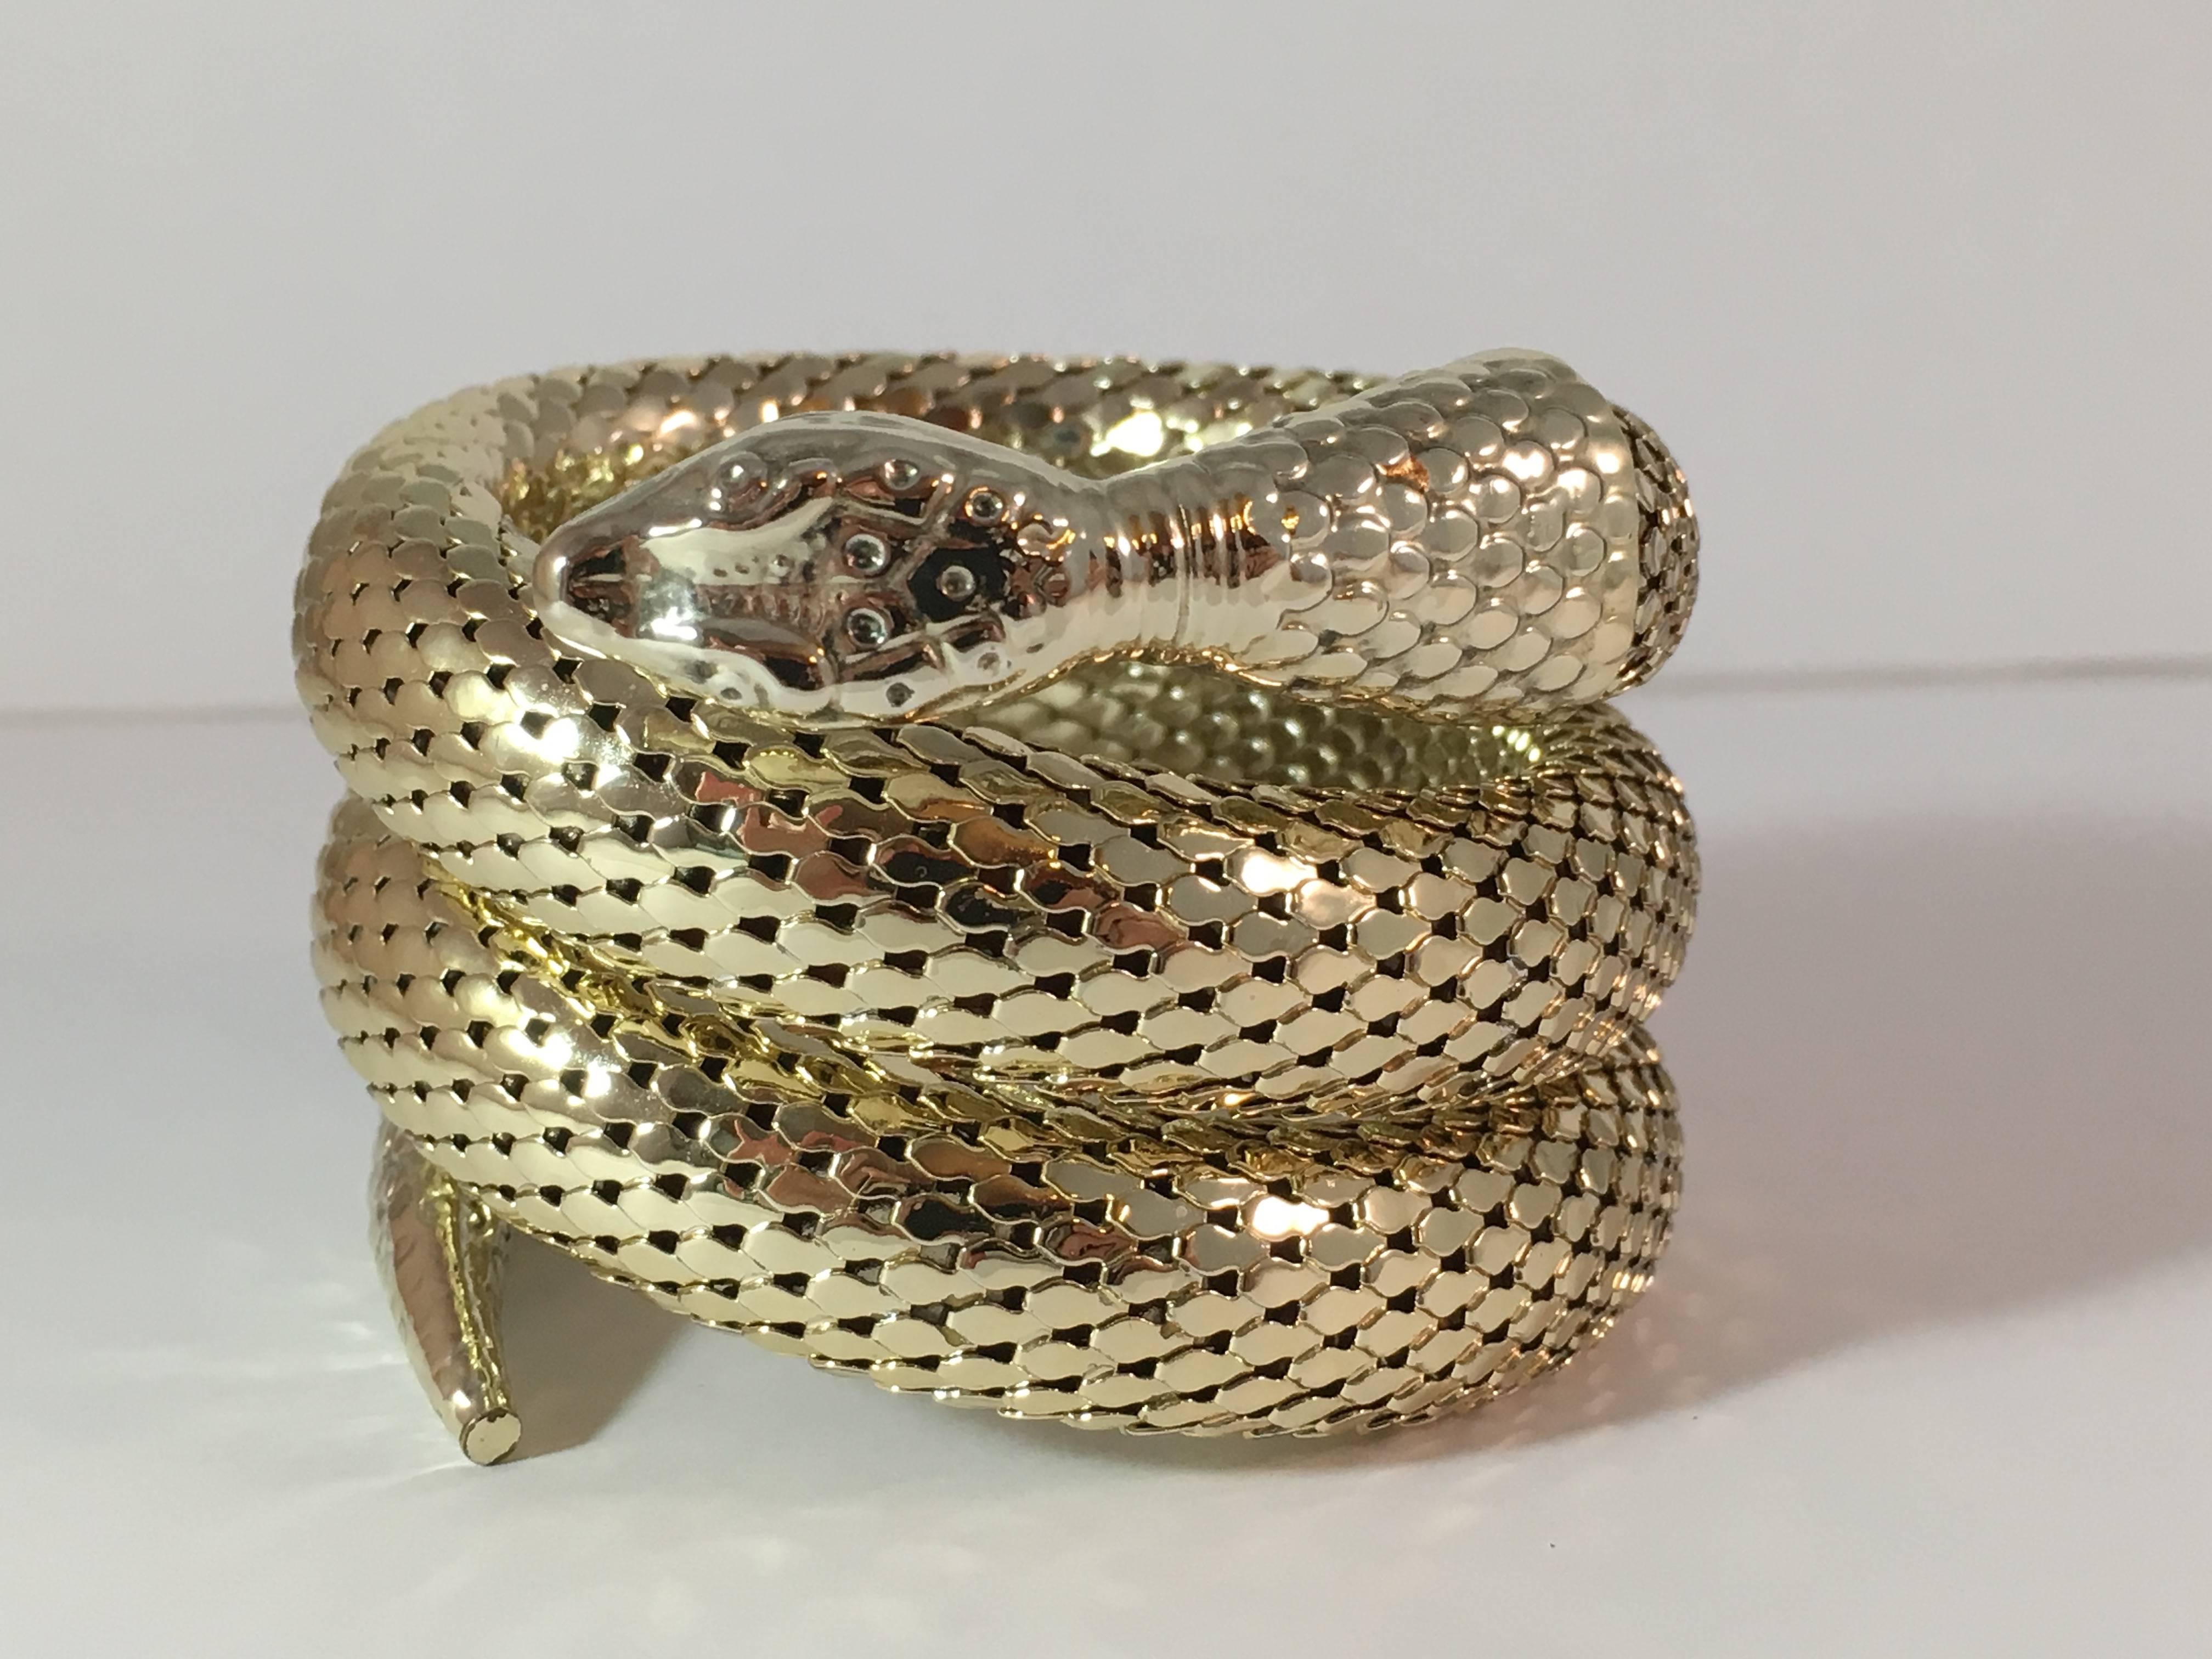 This is a 1970s goldtone coiled rattlesnake bracelet from Whiting and Davis - so fabulous! It is made out of Whiting and Davis' signature chainmail mesh. It measures 2